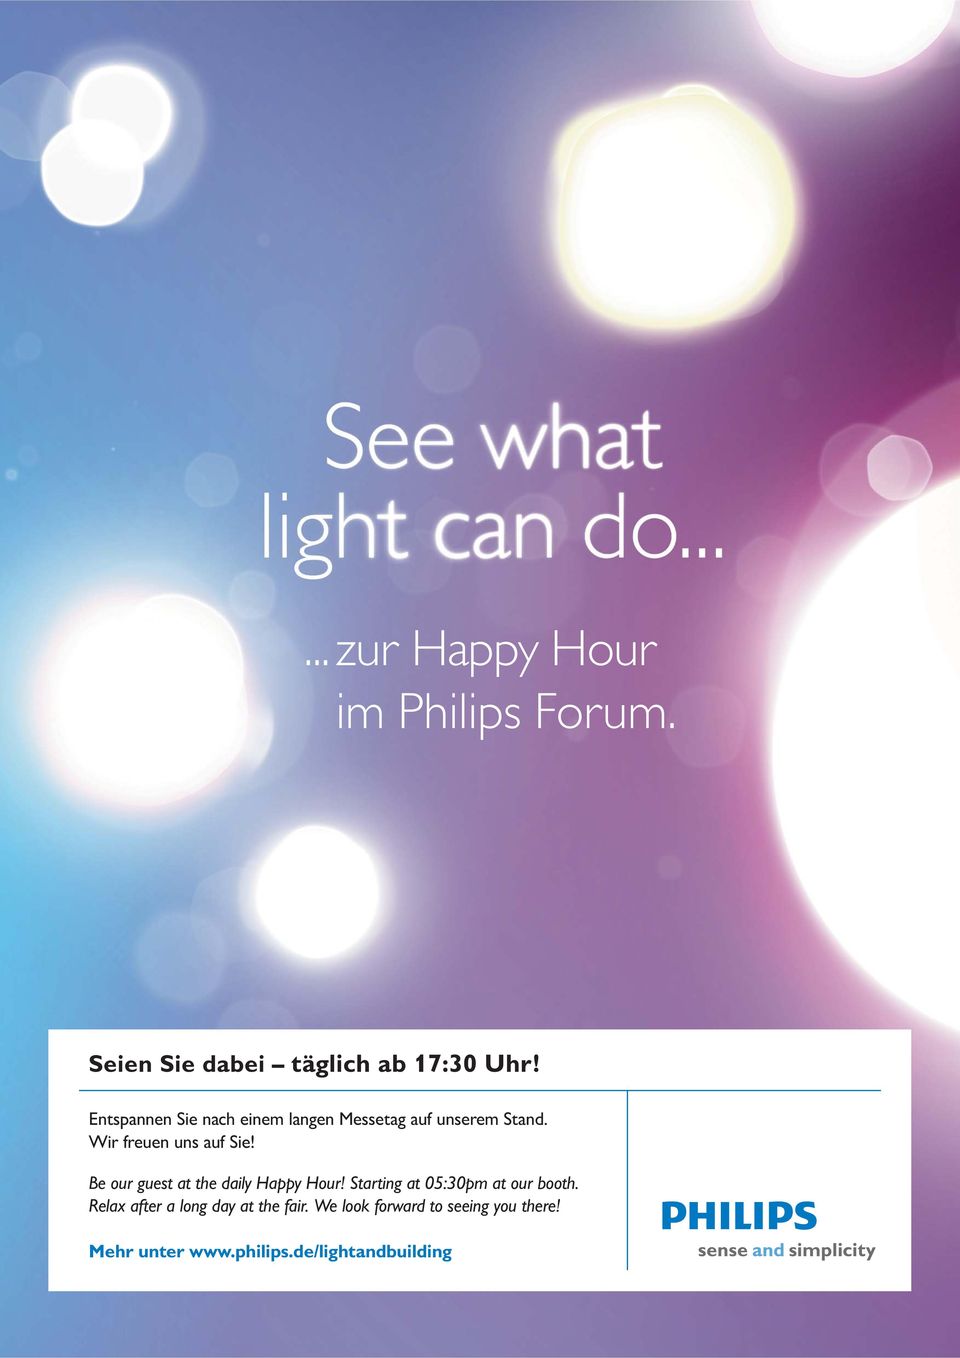 Be our guest at the daily Happy Hour! Starting at 05:30pm at our booth.